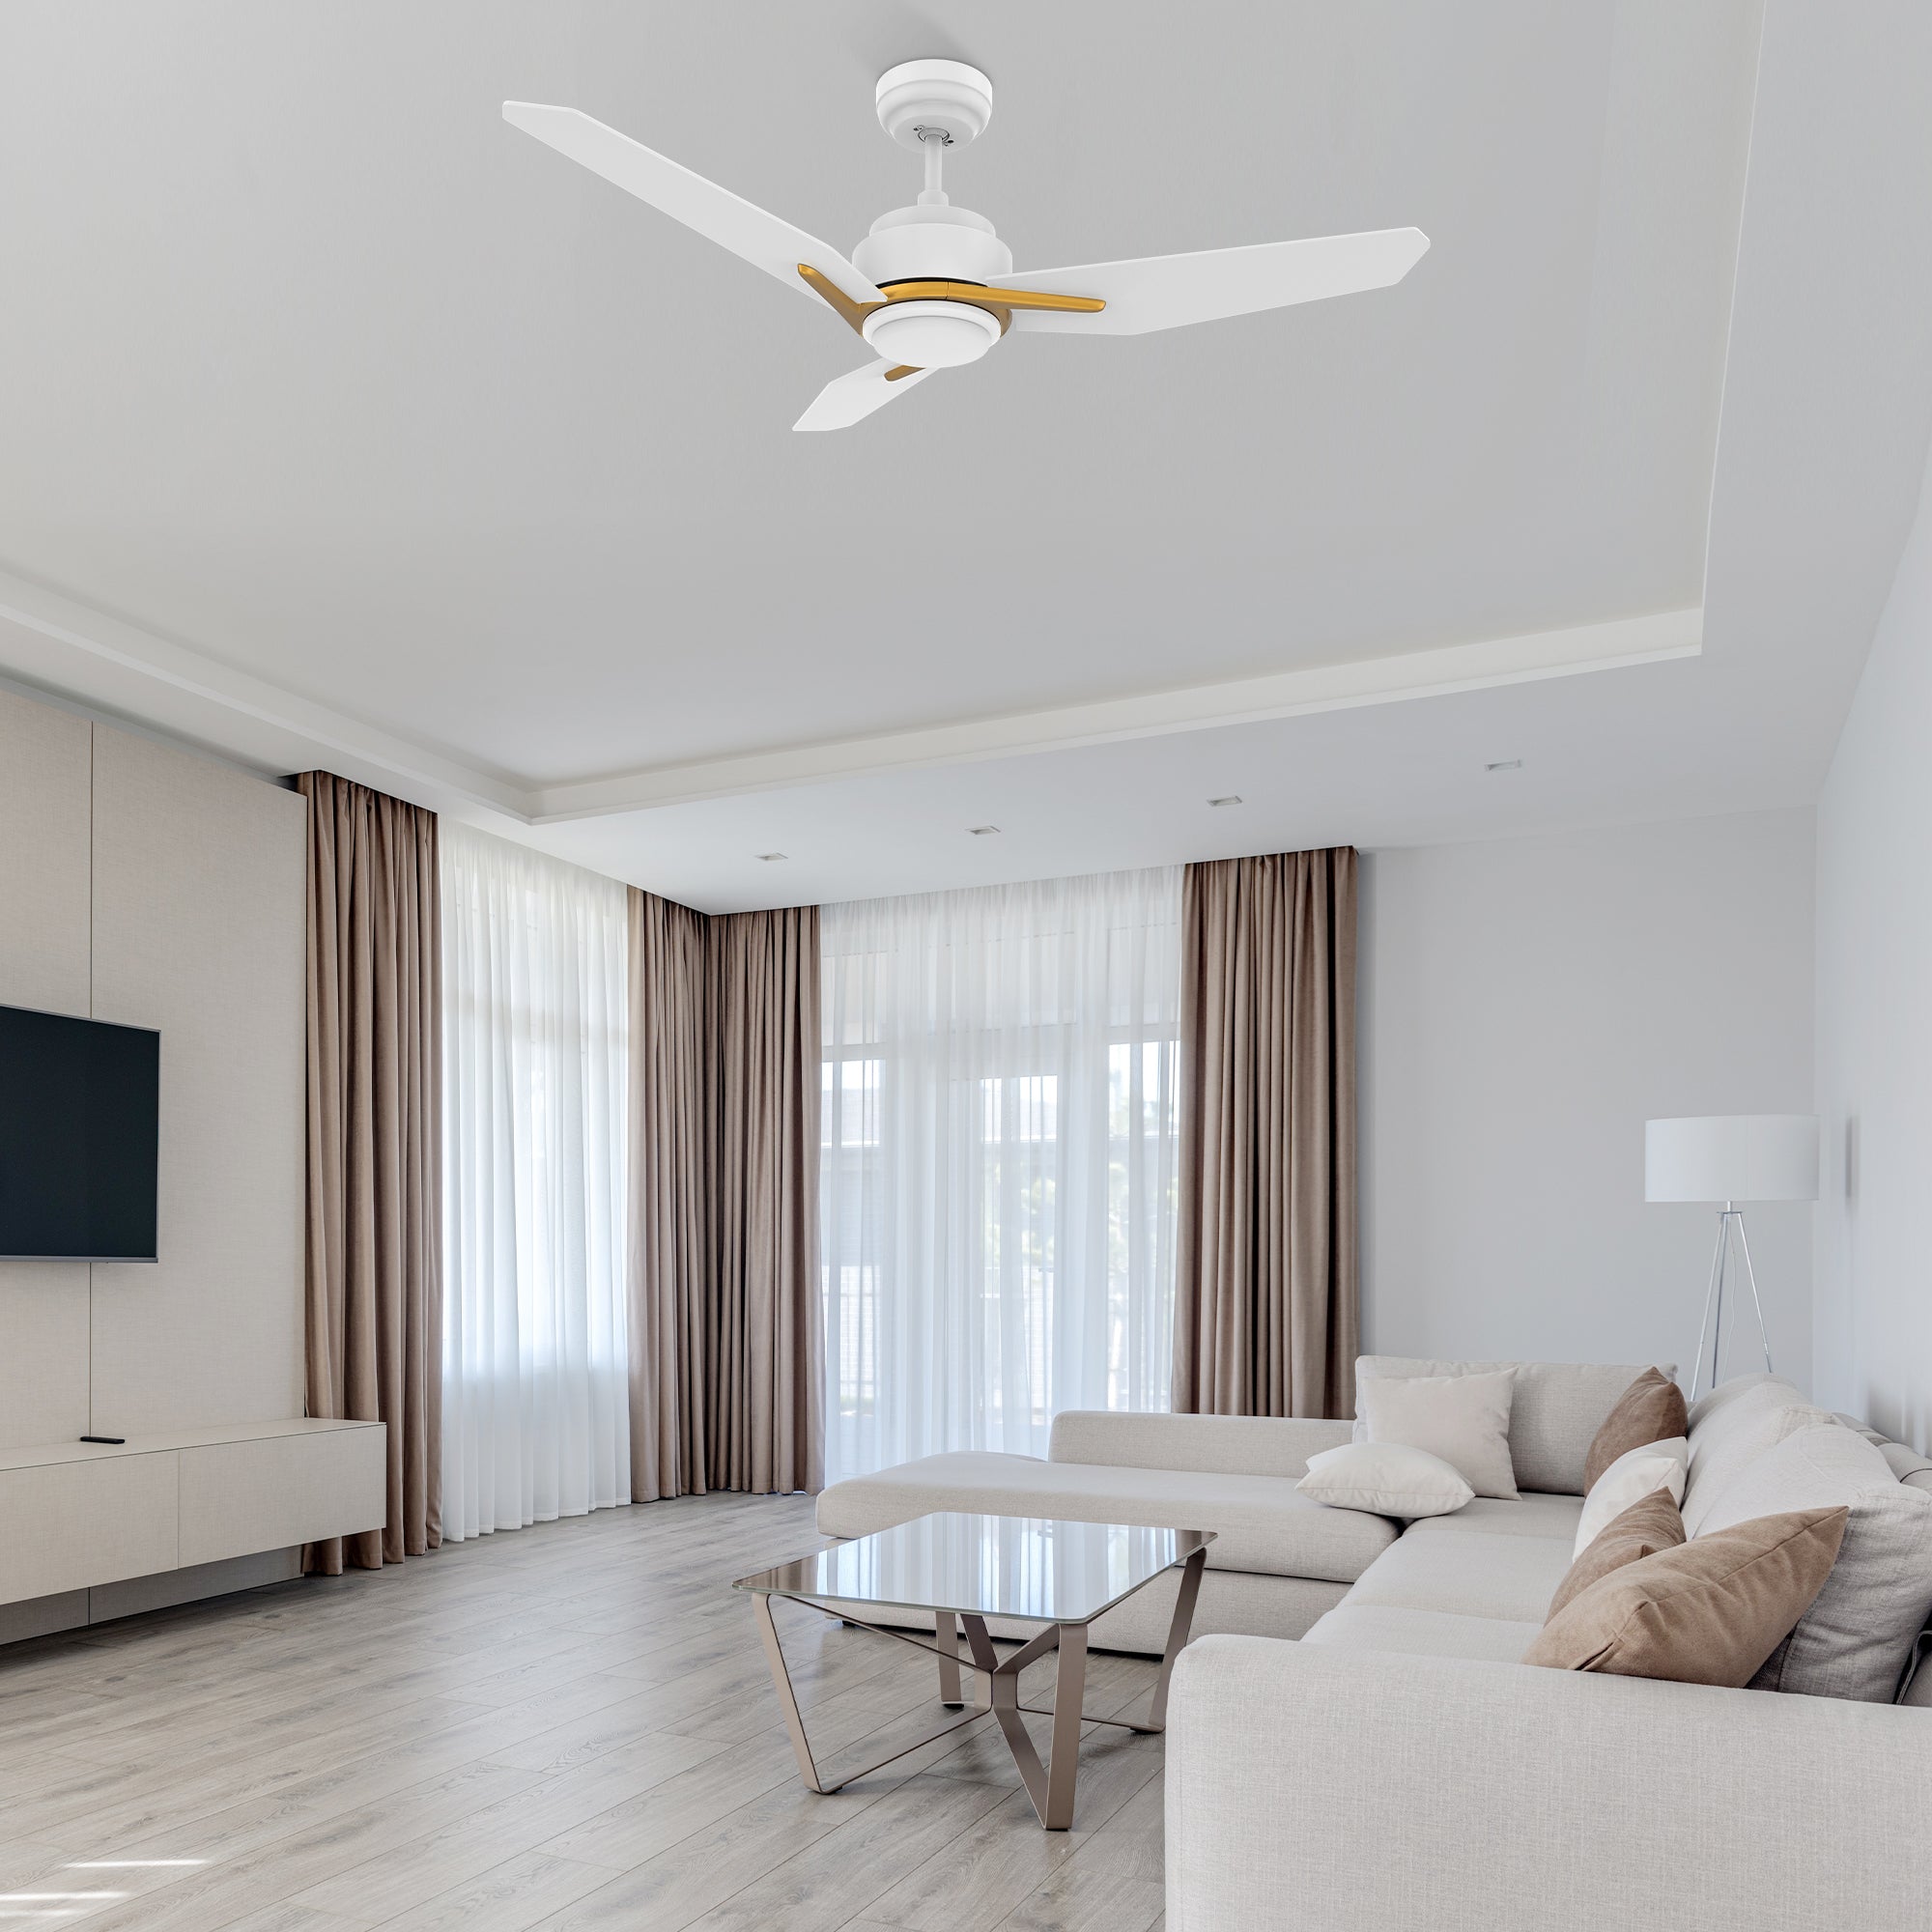 This Tilbury 52&#39;&#39; smart ceiling fan keeps your space cool, bright, and stylish. It is a soft modern masterpiece perfect for your large indoor living spaces. This Wifi smart ceiling fan is a simplicity designing with White finish, use elegant Plywood blades and has an integrated 4000K LED cool light. The fan features Remote control, Wi-Fi apps, Siri Shortcut and Voice control technology (compatible with Amazon Alexa and Google Home Assistant ) to set fan preferences.